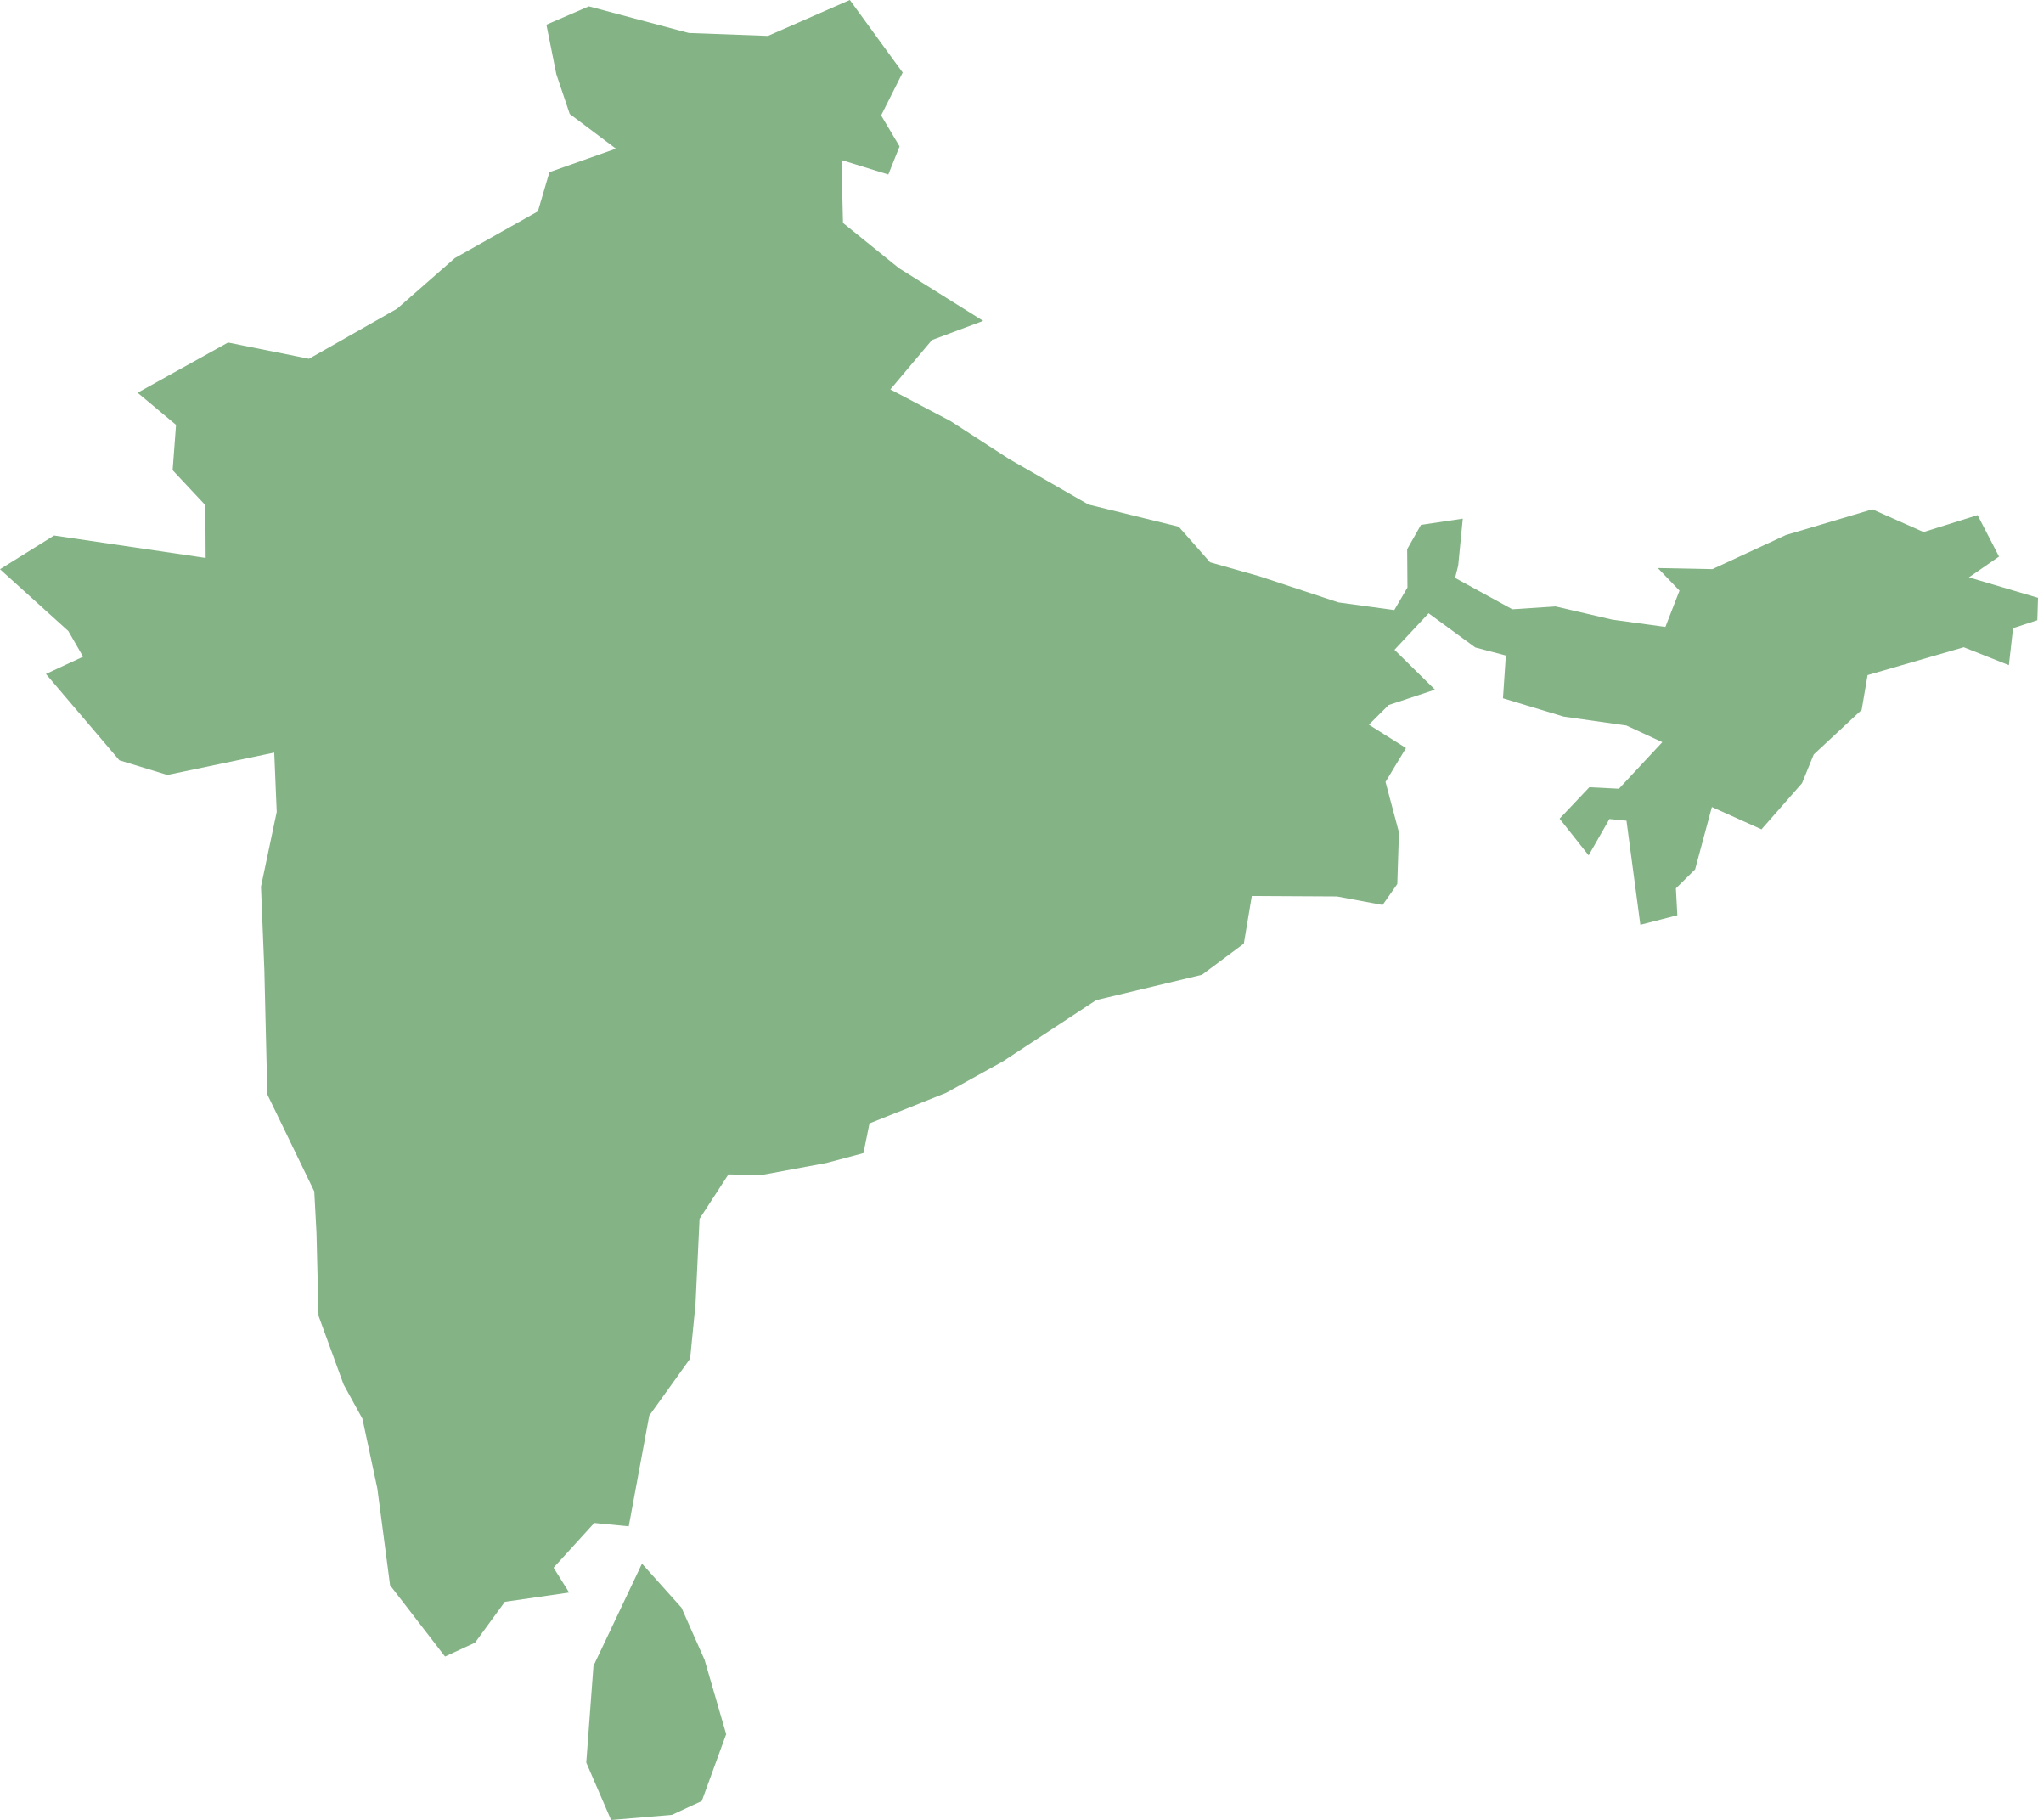 clipart map of india - photo #4